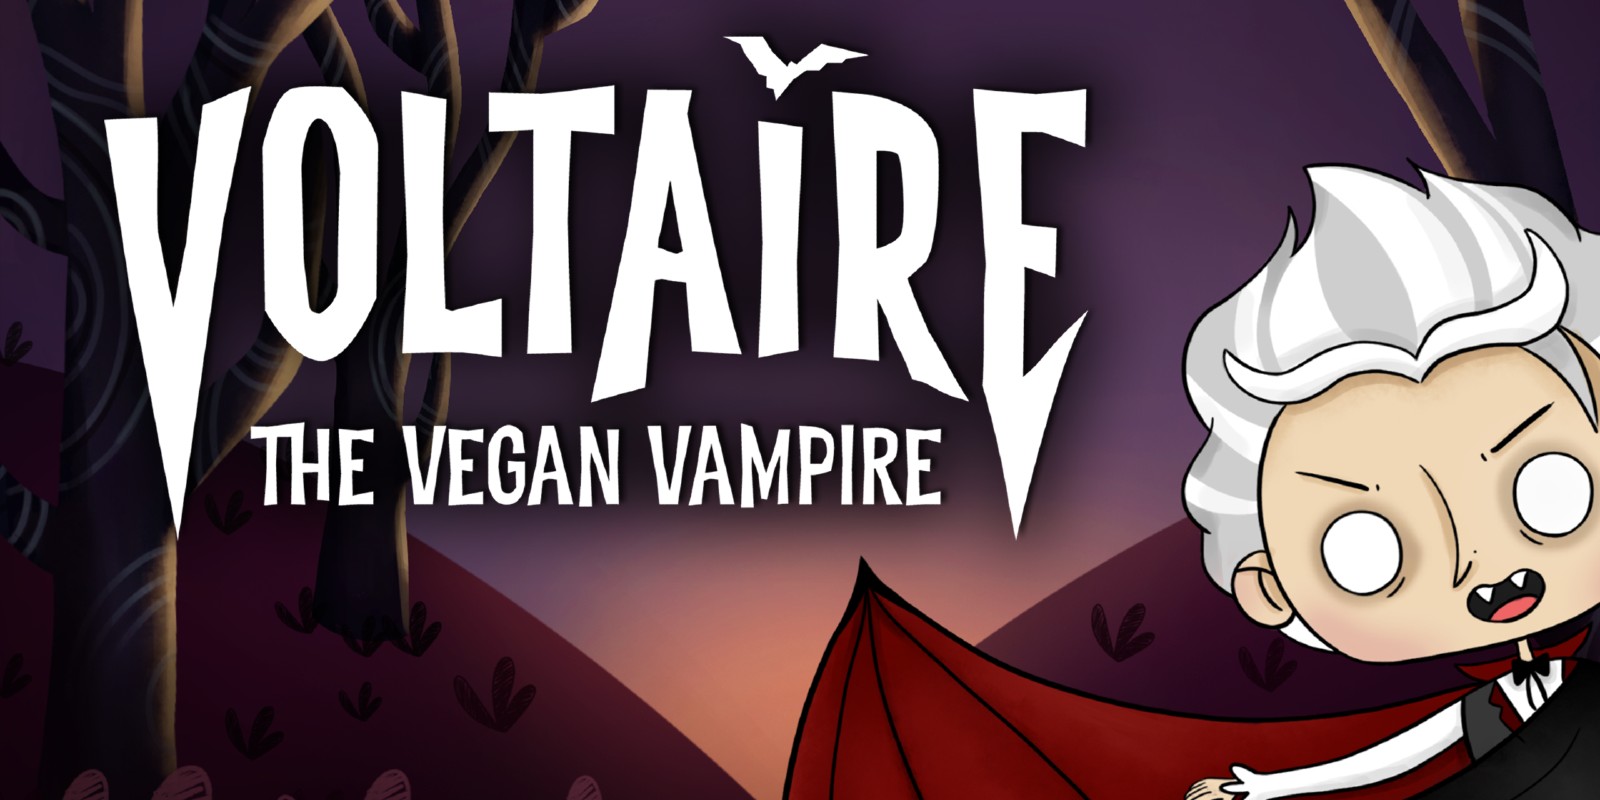 download the last version for android Voltaire: The Vegan Vampire